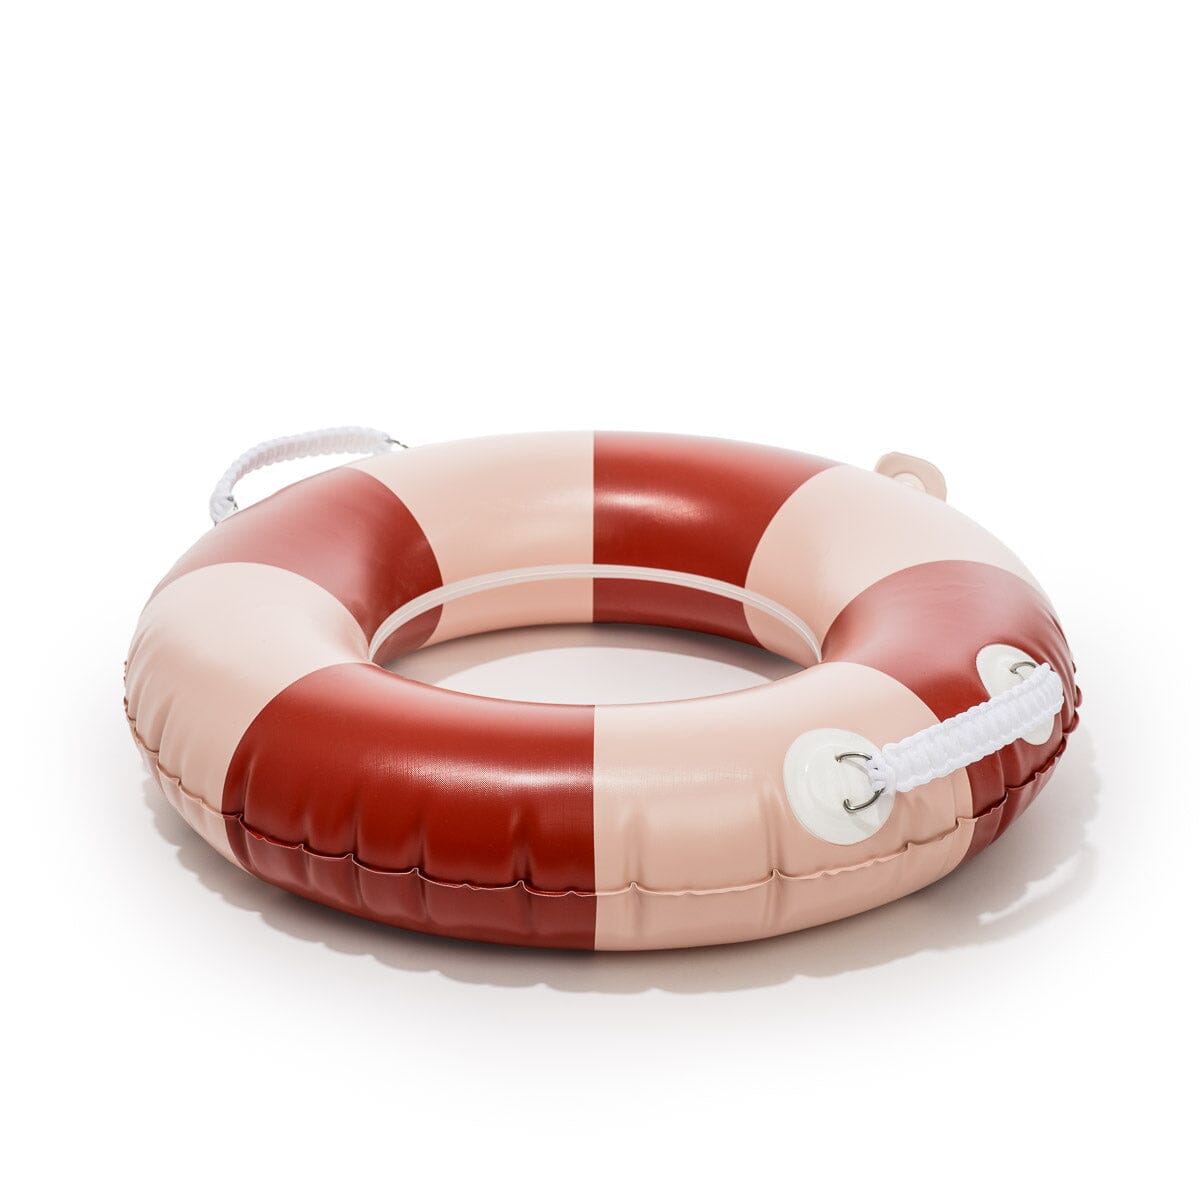 The Classic Pool Float - Small - Rivie Pink Pool Float Business & Pleasure Co Aus 